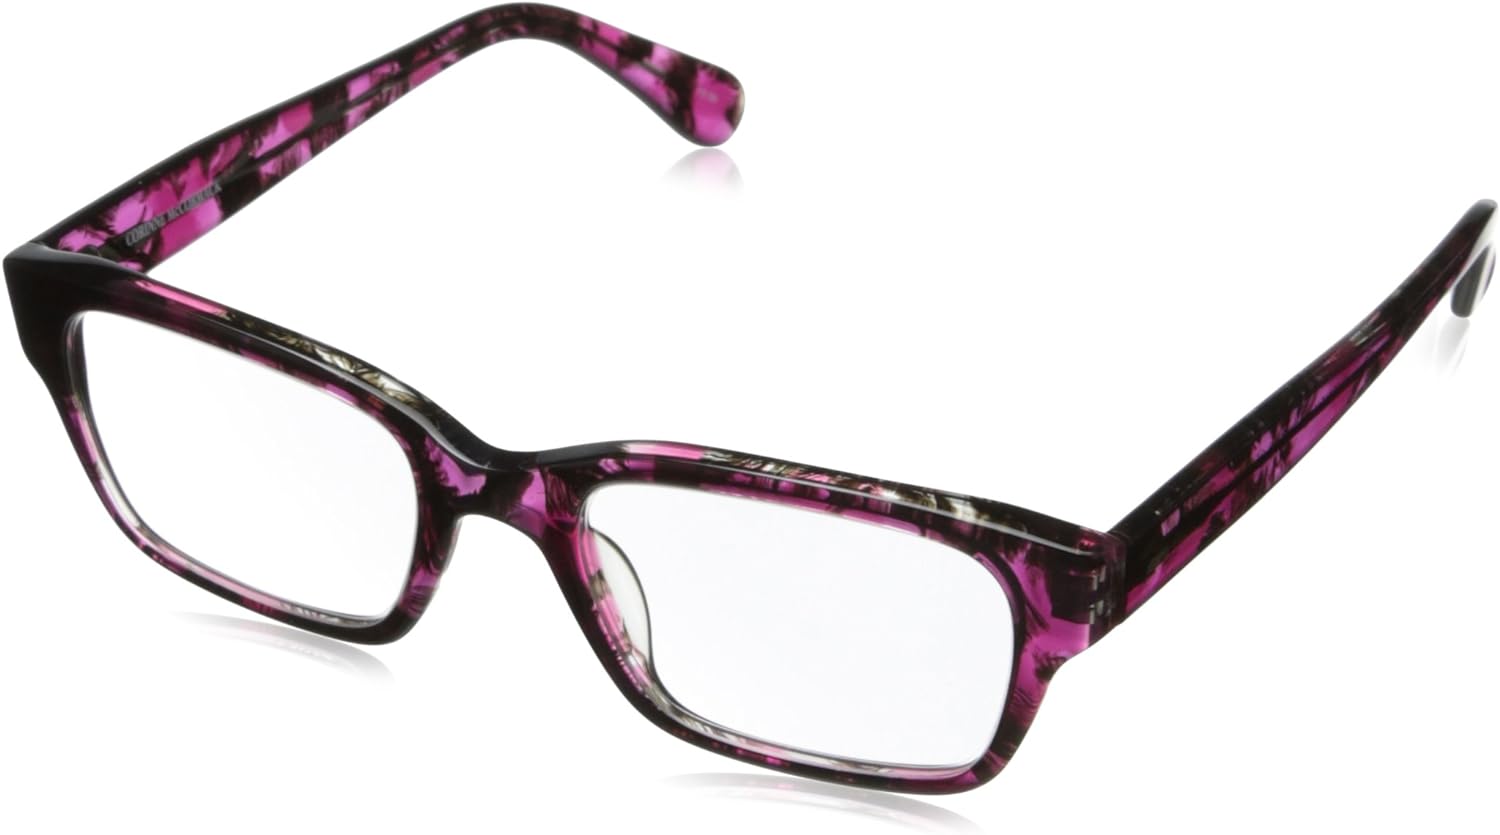 Are These the 10 Best Corinne McCormack Reading Glasses